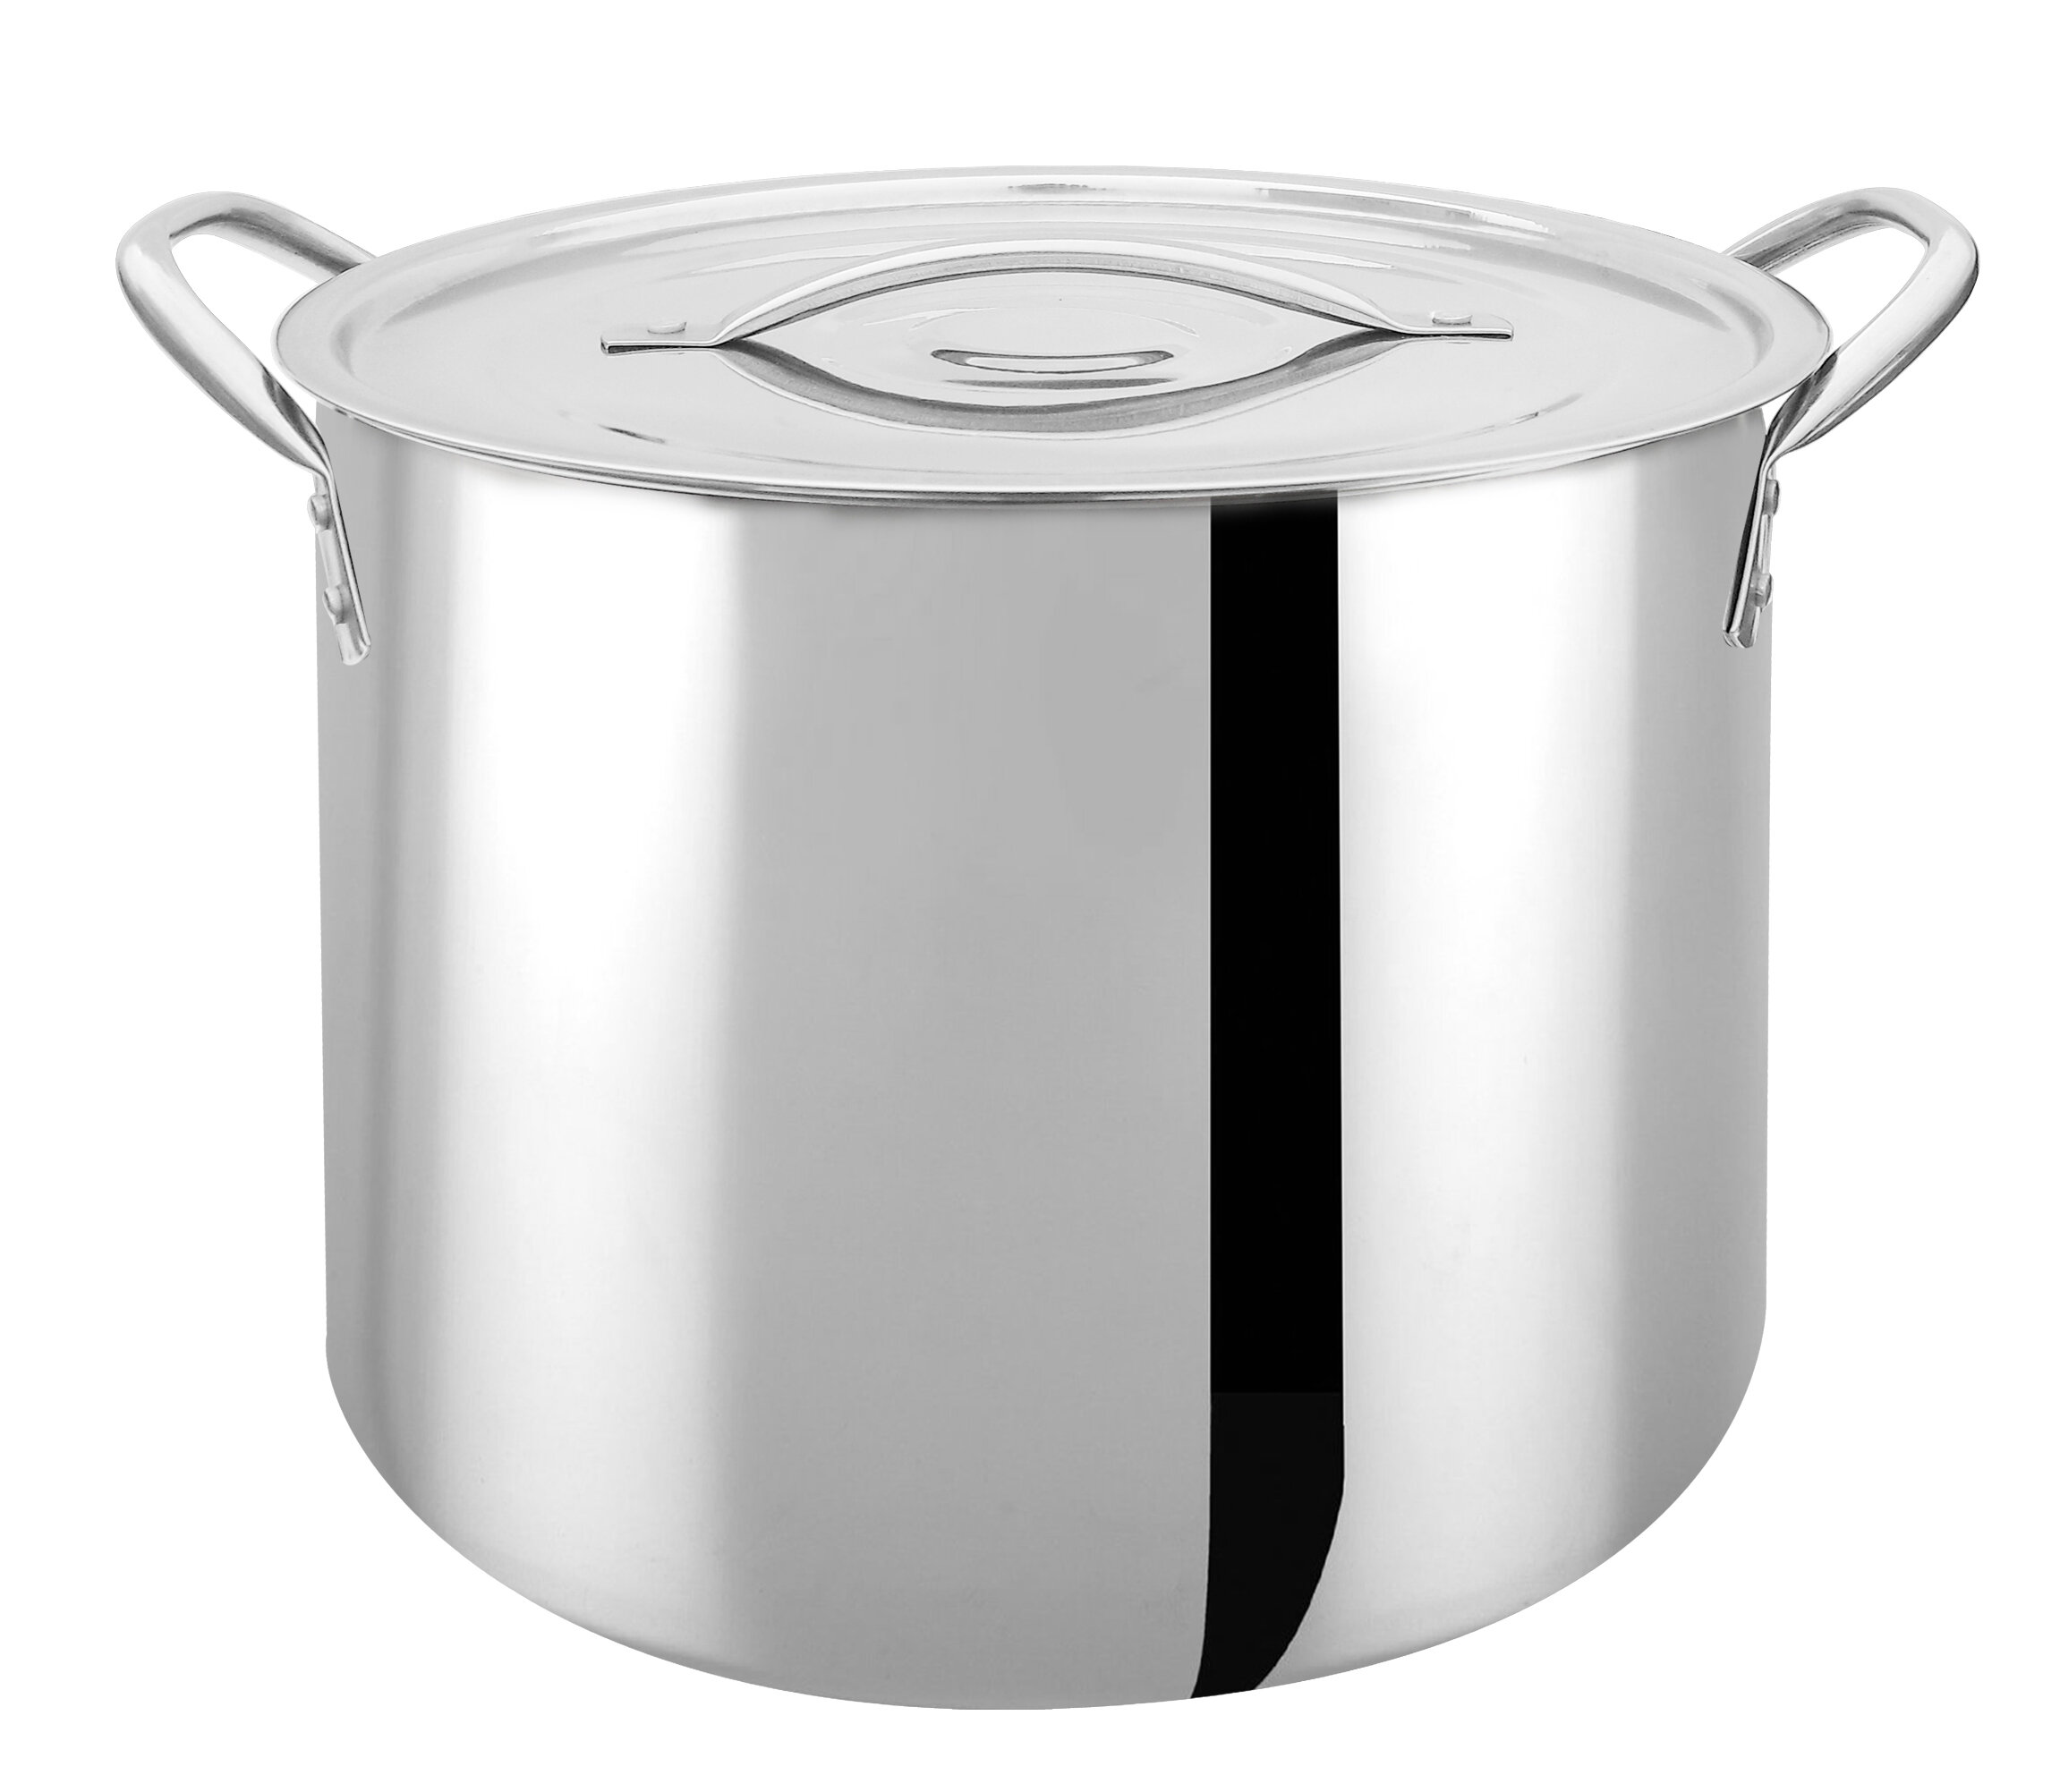 360 Cookware Stainless Steel 12 Qt Stock Pot with Cover